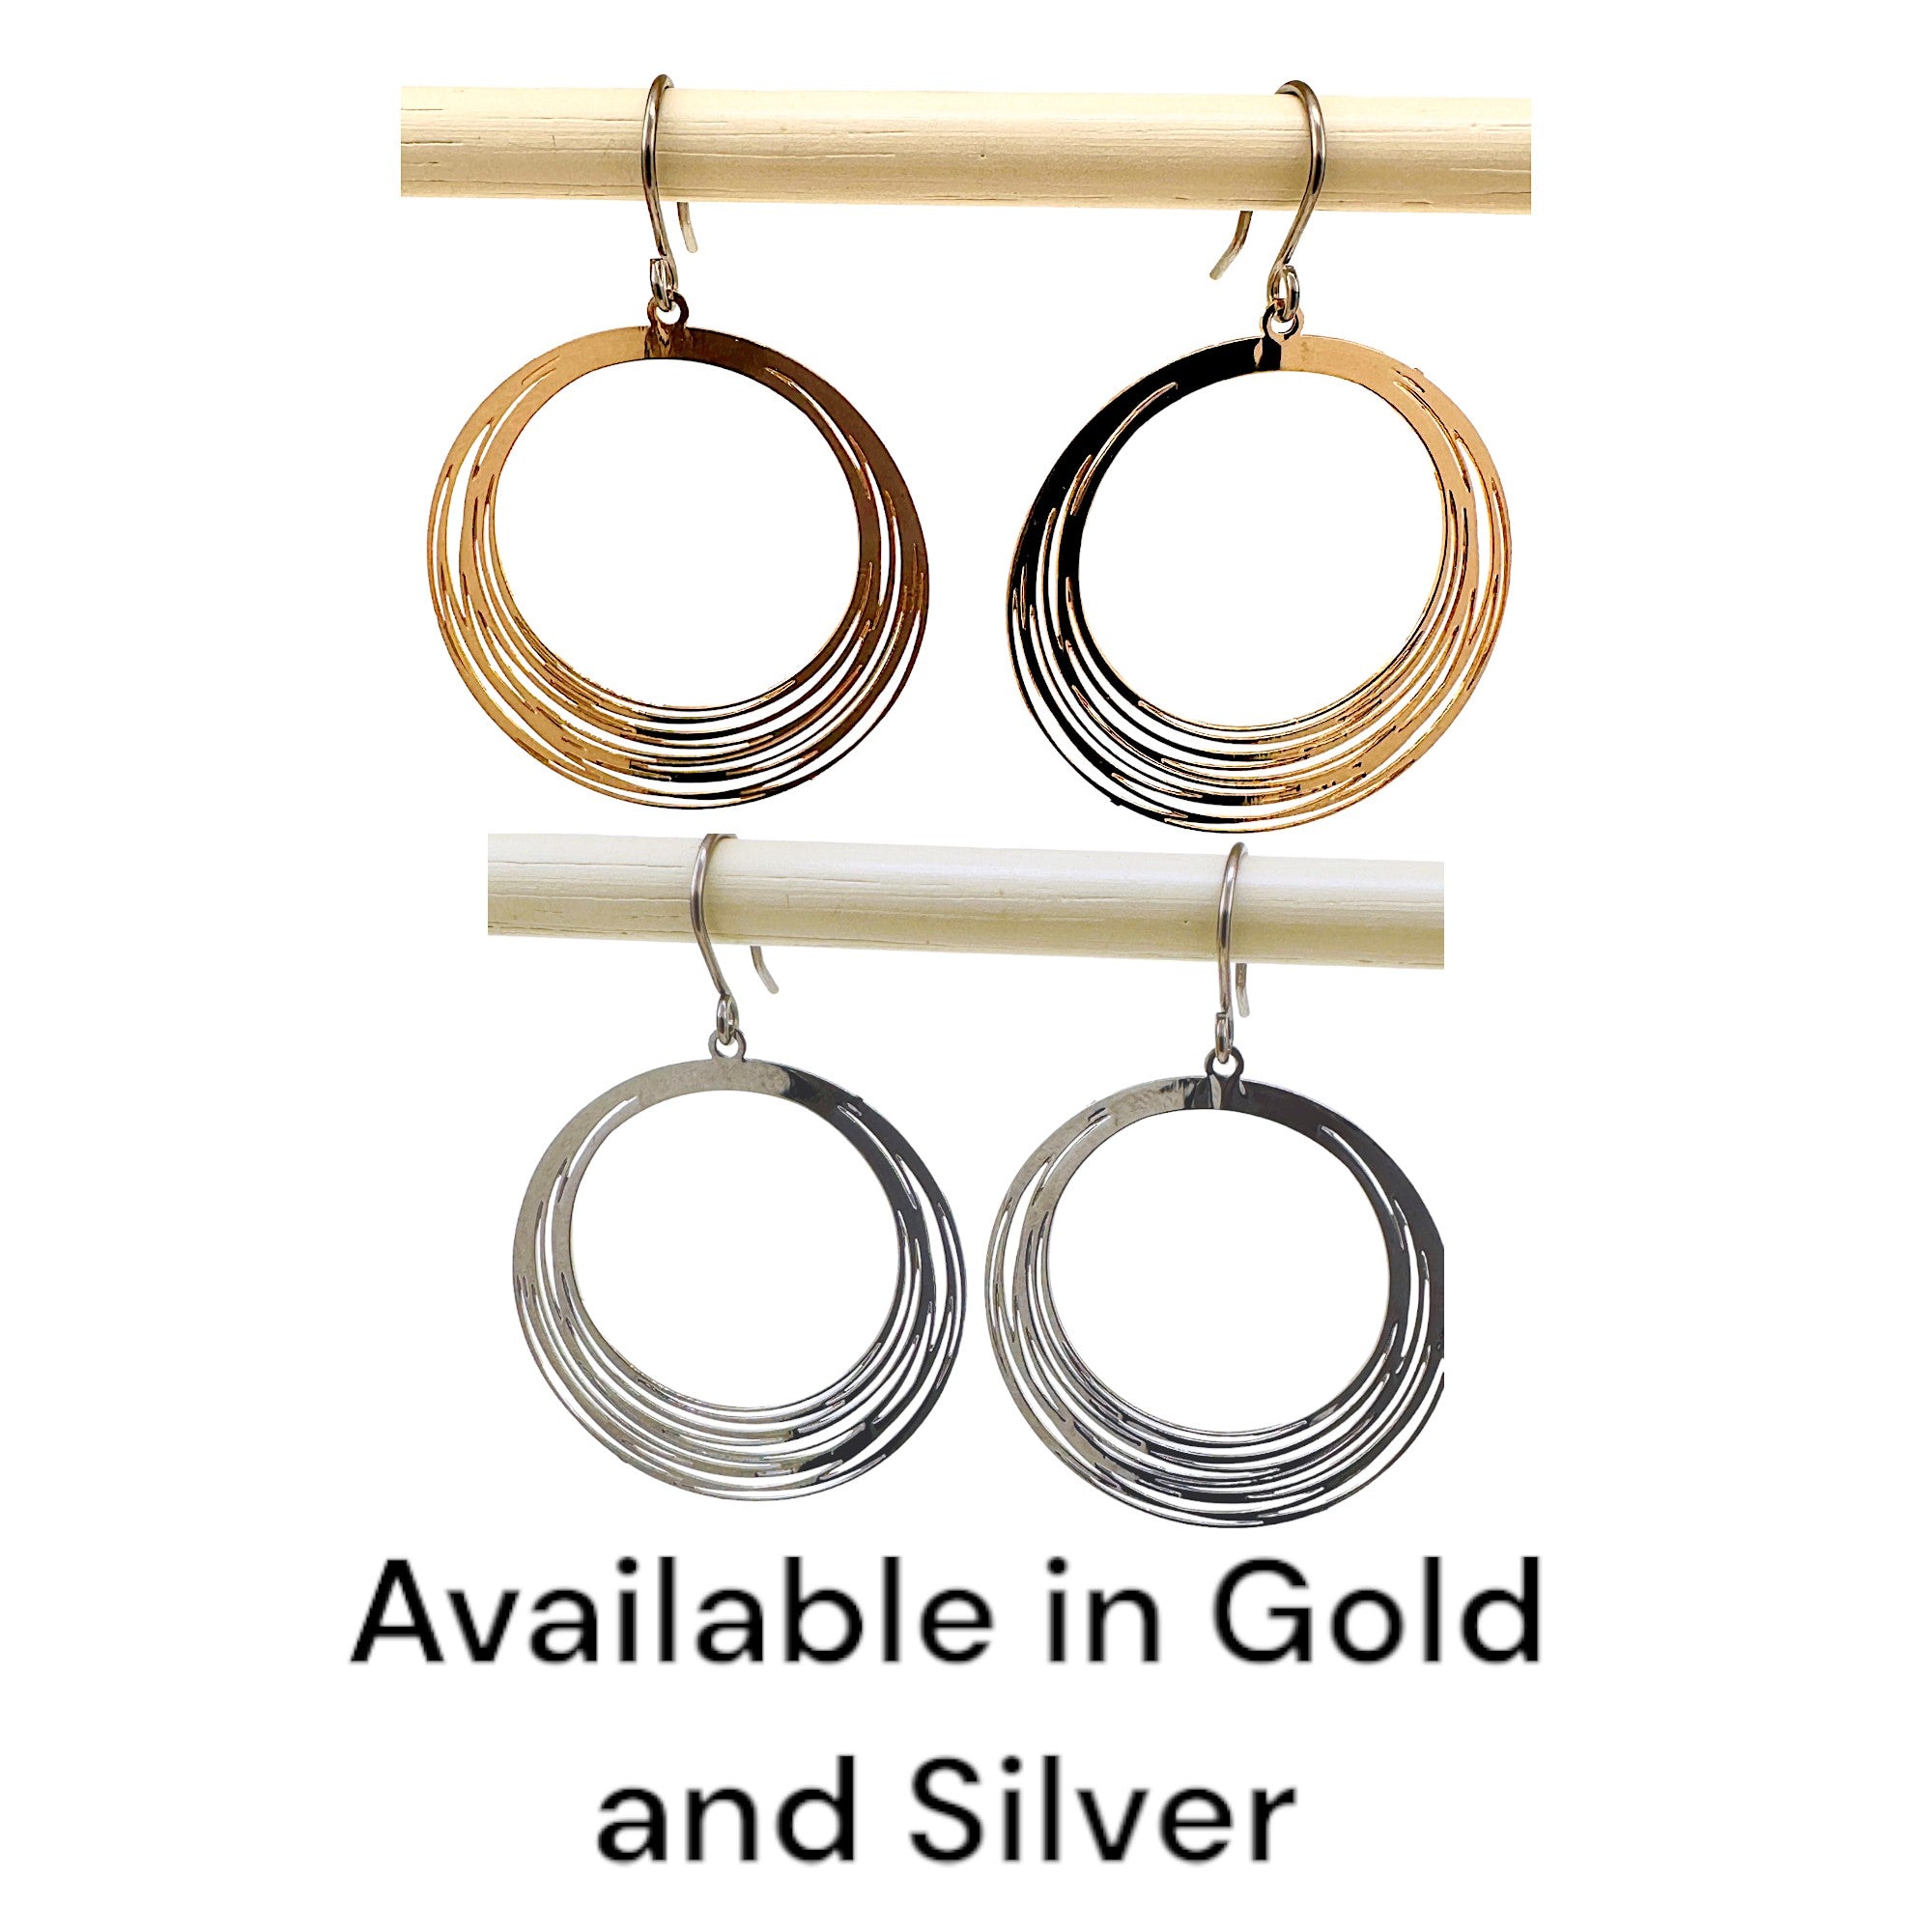 Gold, Silver, String Ring earrings that are round and a titanium hook on a white background